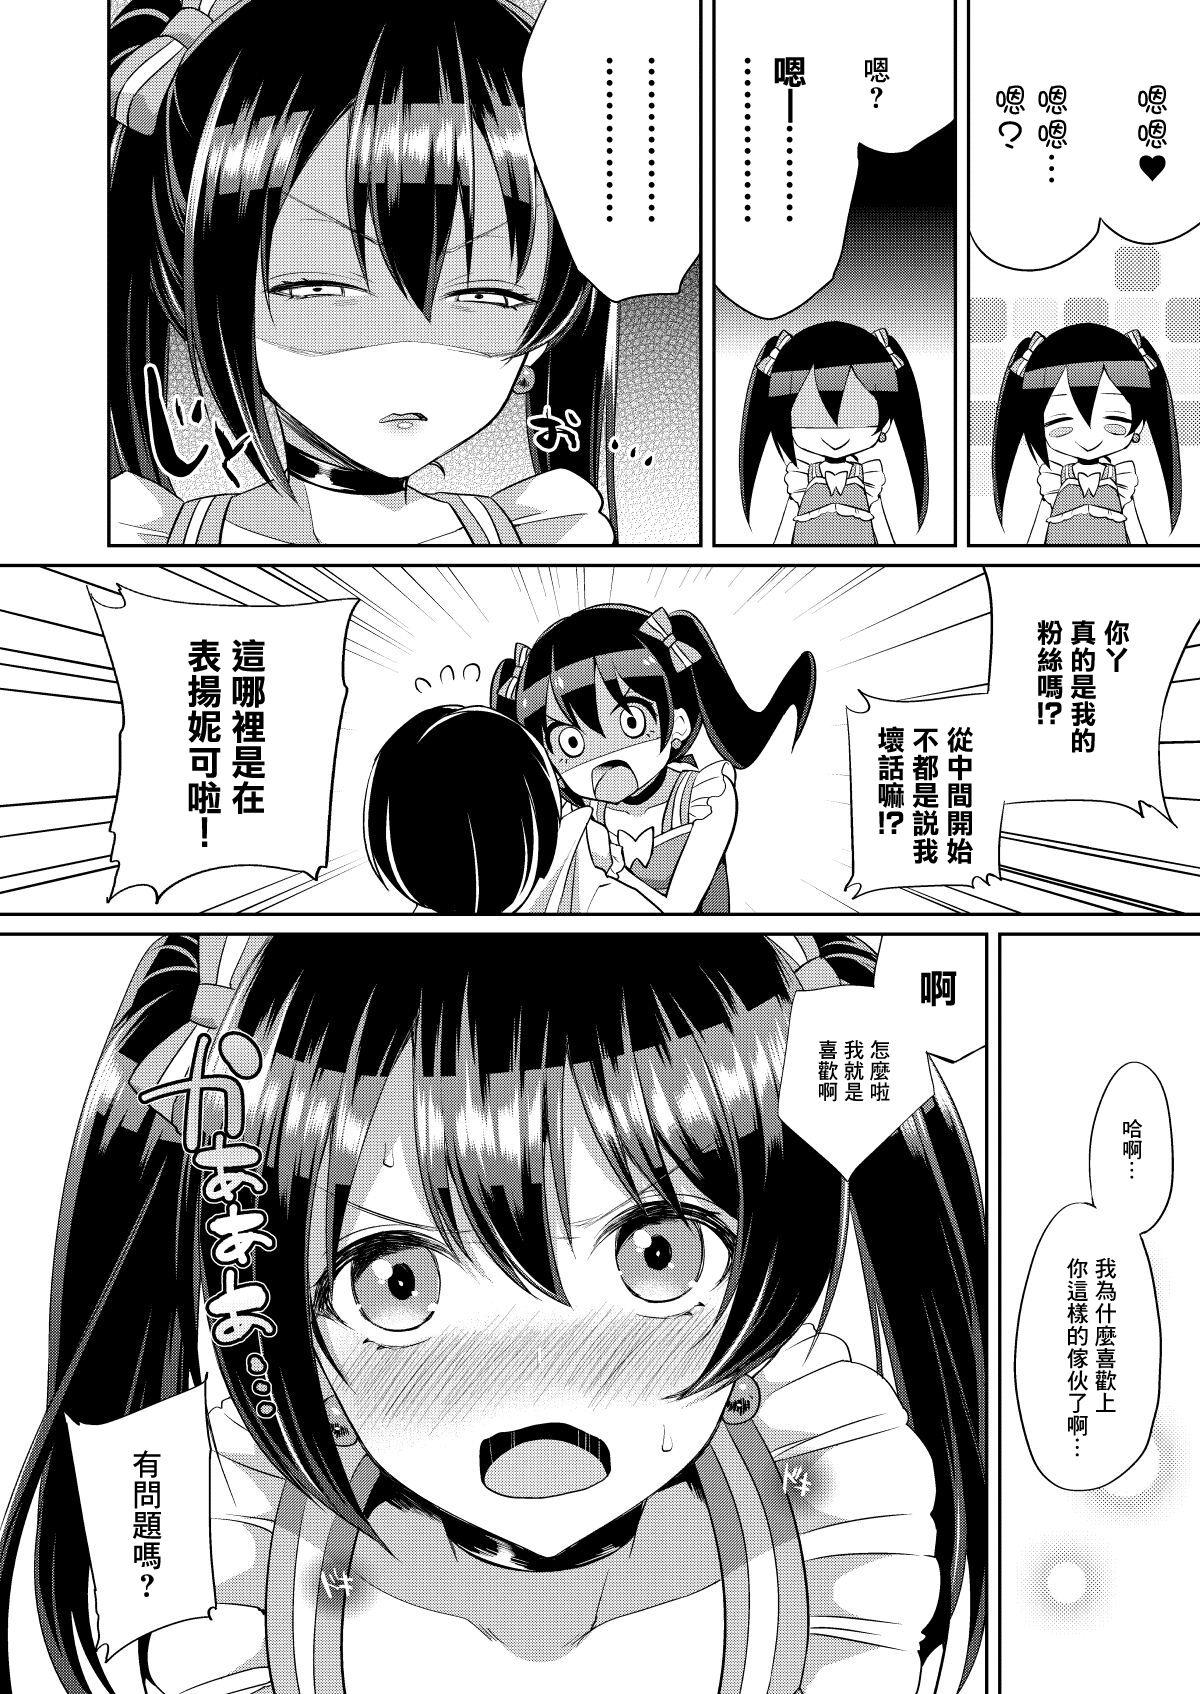 Rough Porn にこといちゃラブエッチ - Love live Free Amateur - Page 2